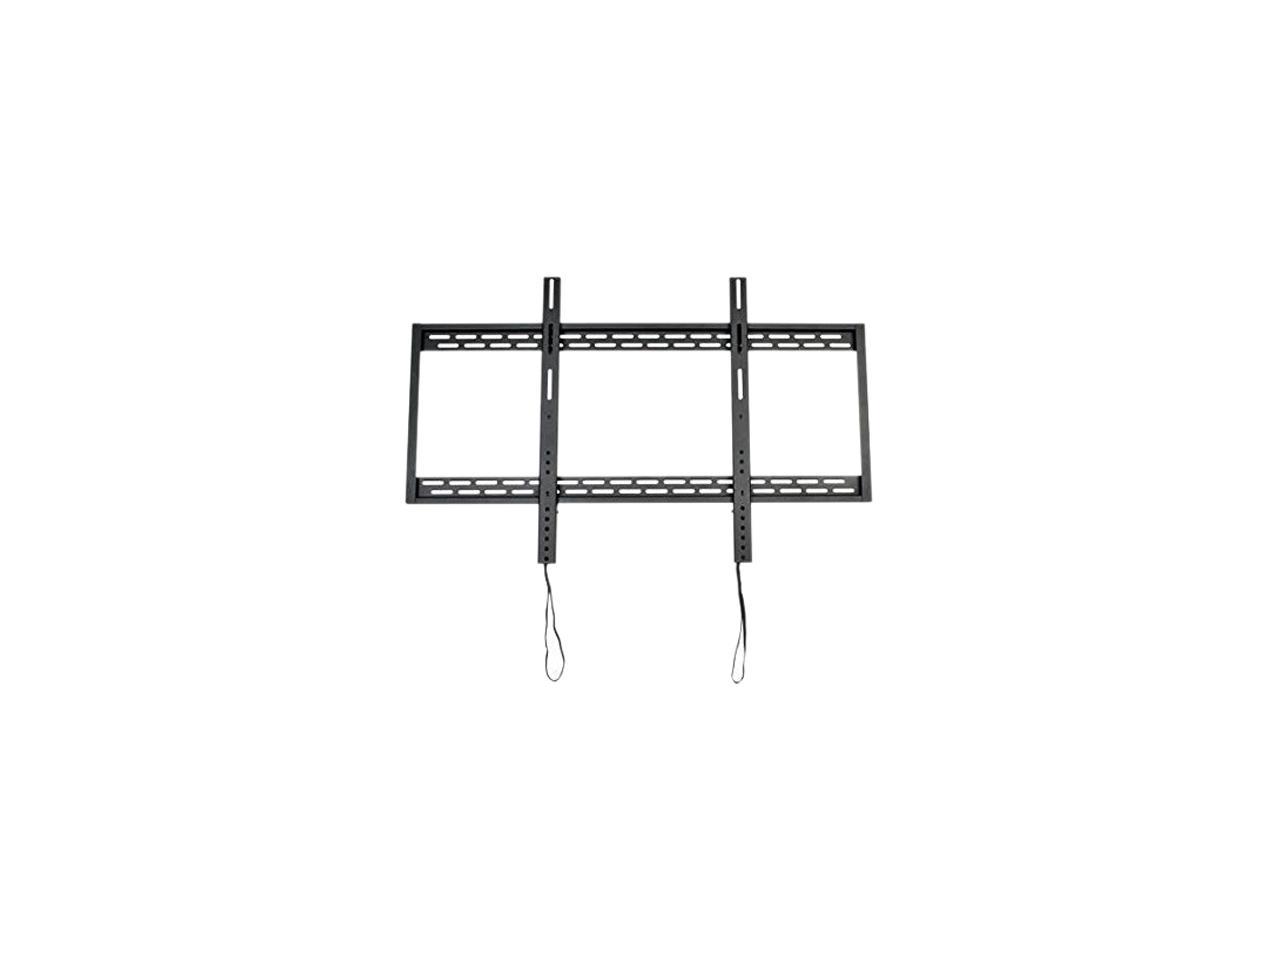 Tripp Lite DWF60100XX 60"-100" Fixed TV wall mount LED & LCD HDTV up to VESA 900x600 max load 350 lbs Compatible with Samsung, Vizio, Sony, Panasonic, LG and Toshiba TV - image 3 of 4